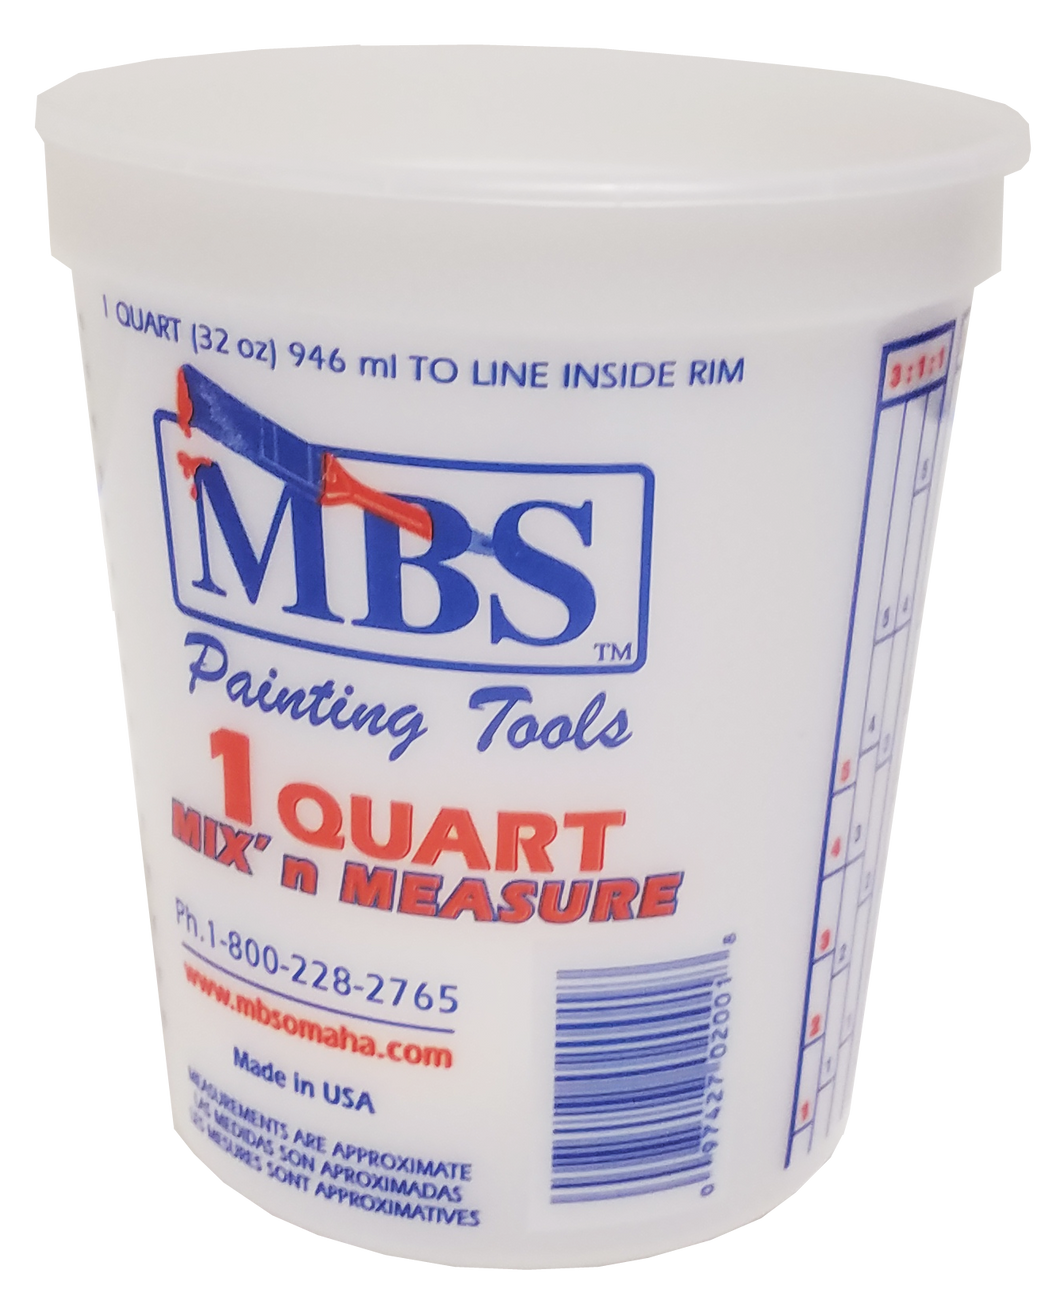 Pack of 100 1 Quart Mix 'N Measure Bucket, Made in USA